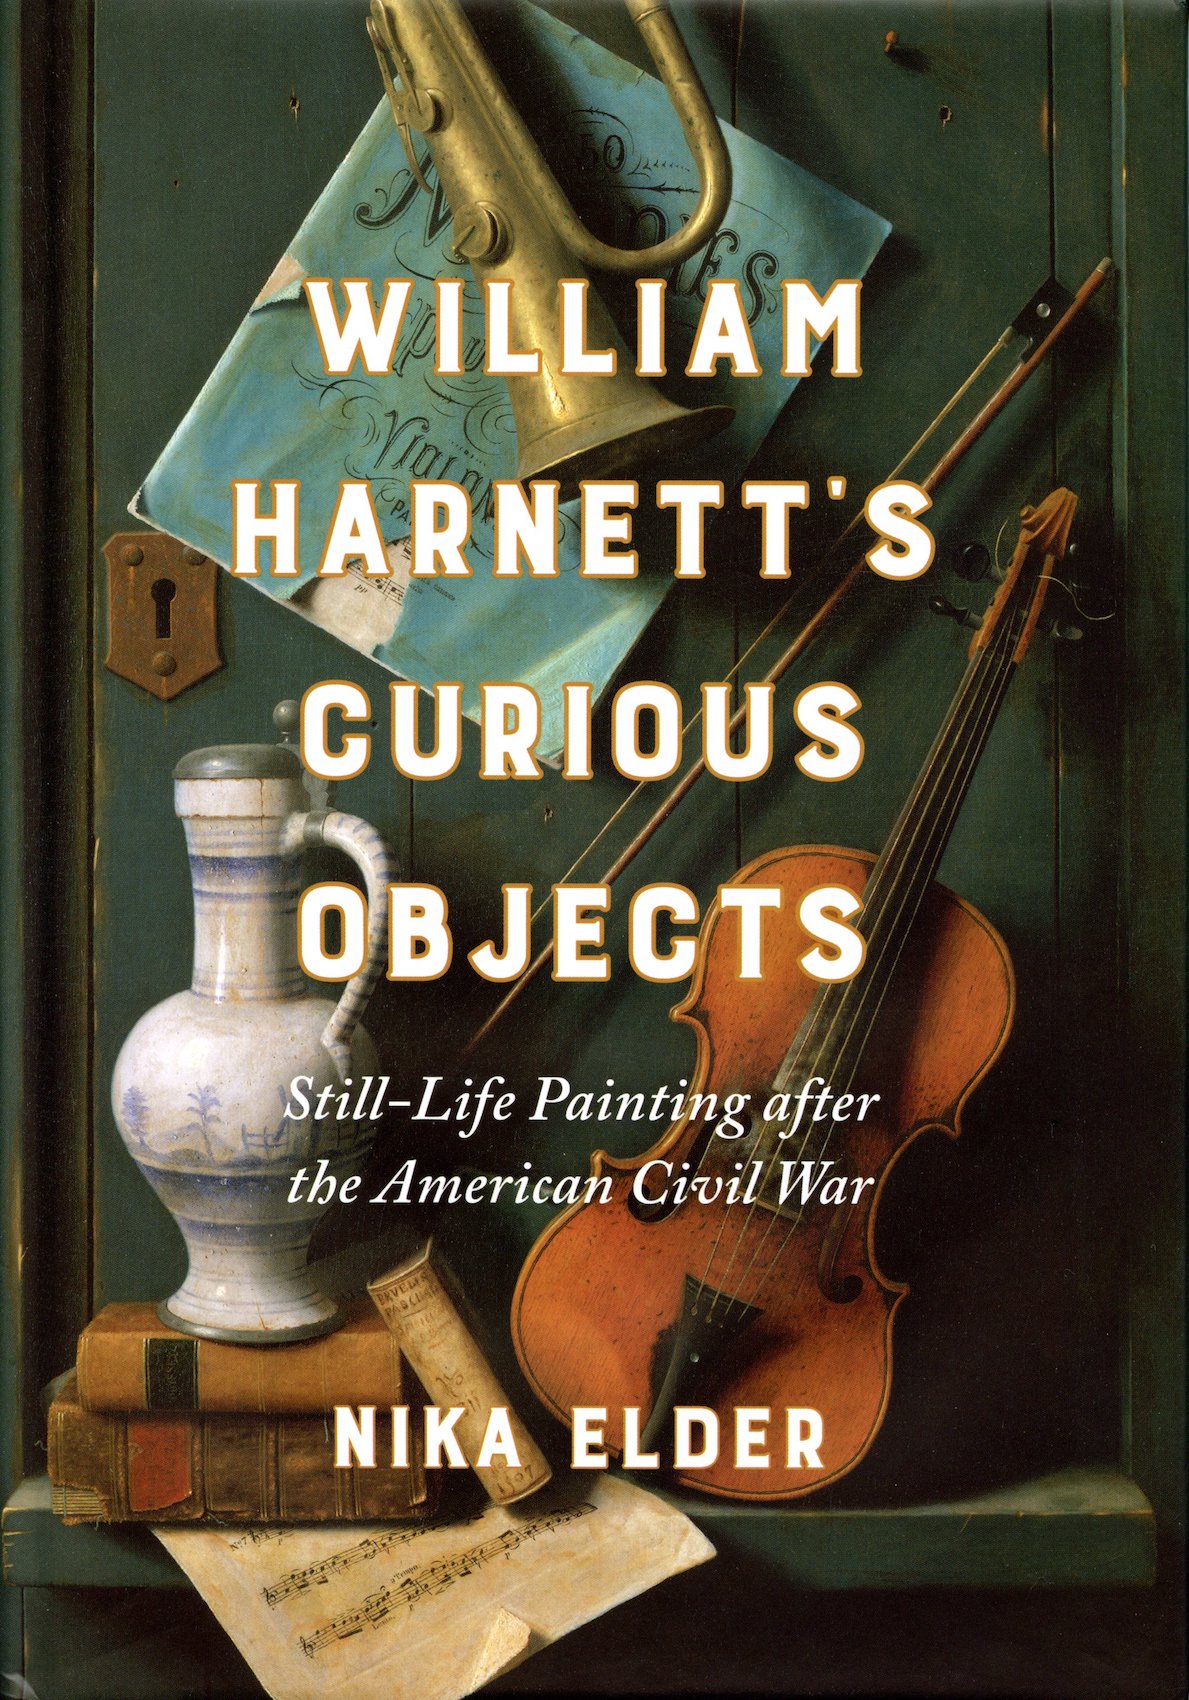 Cover image of William Harnett’s Curious Objects: Still-Life Painting after the American Civil War